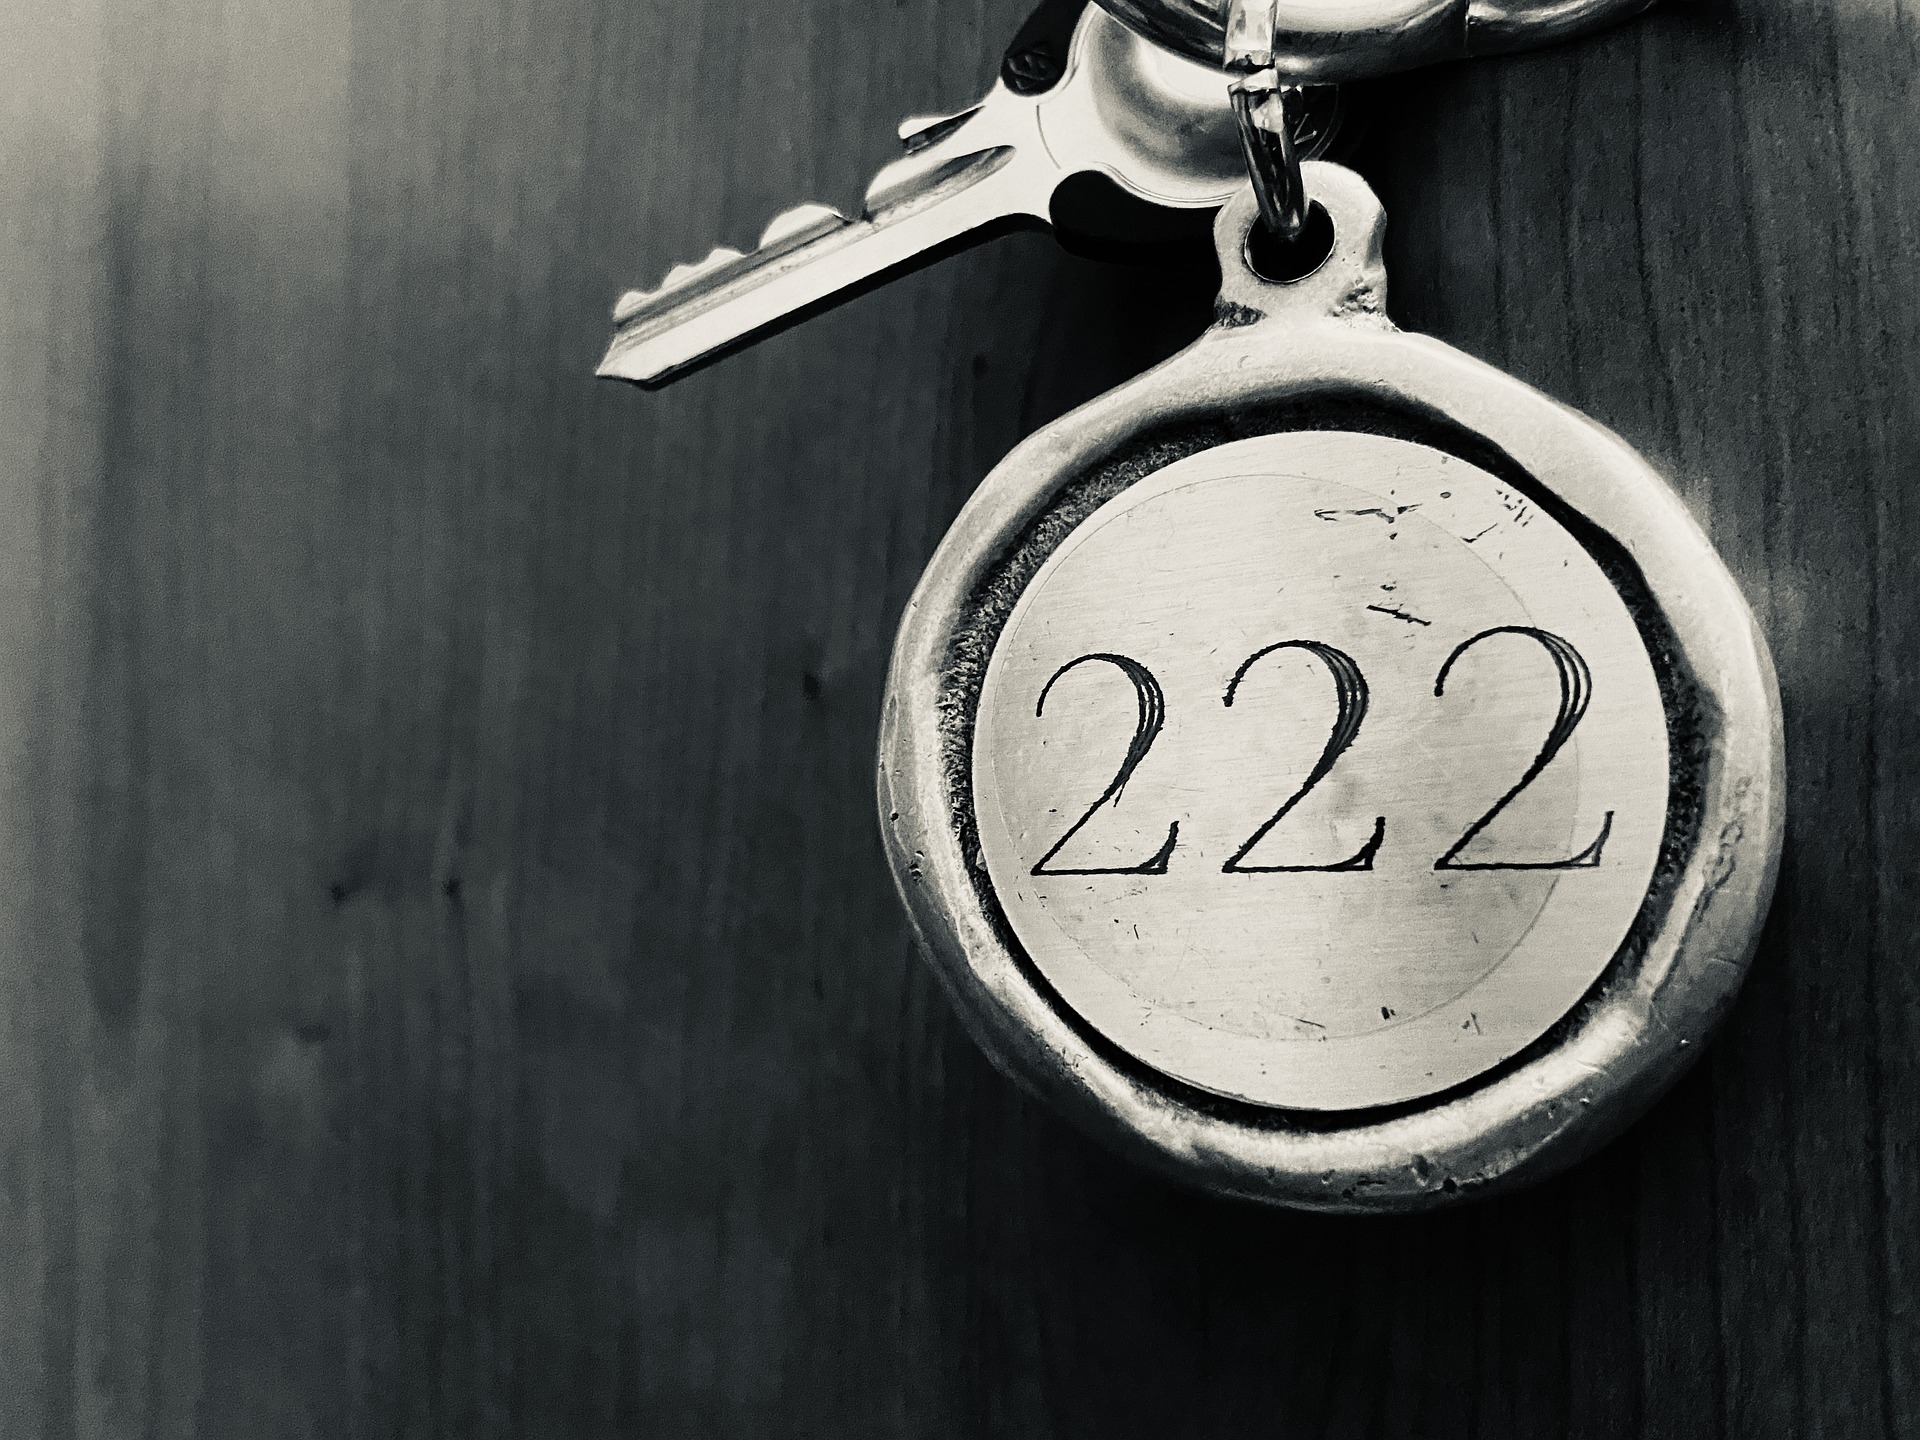 Key ring with number 222